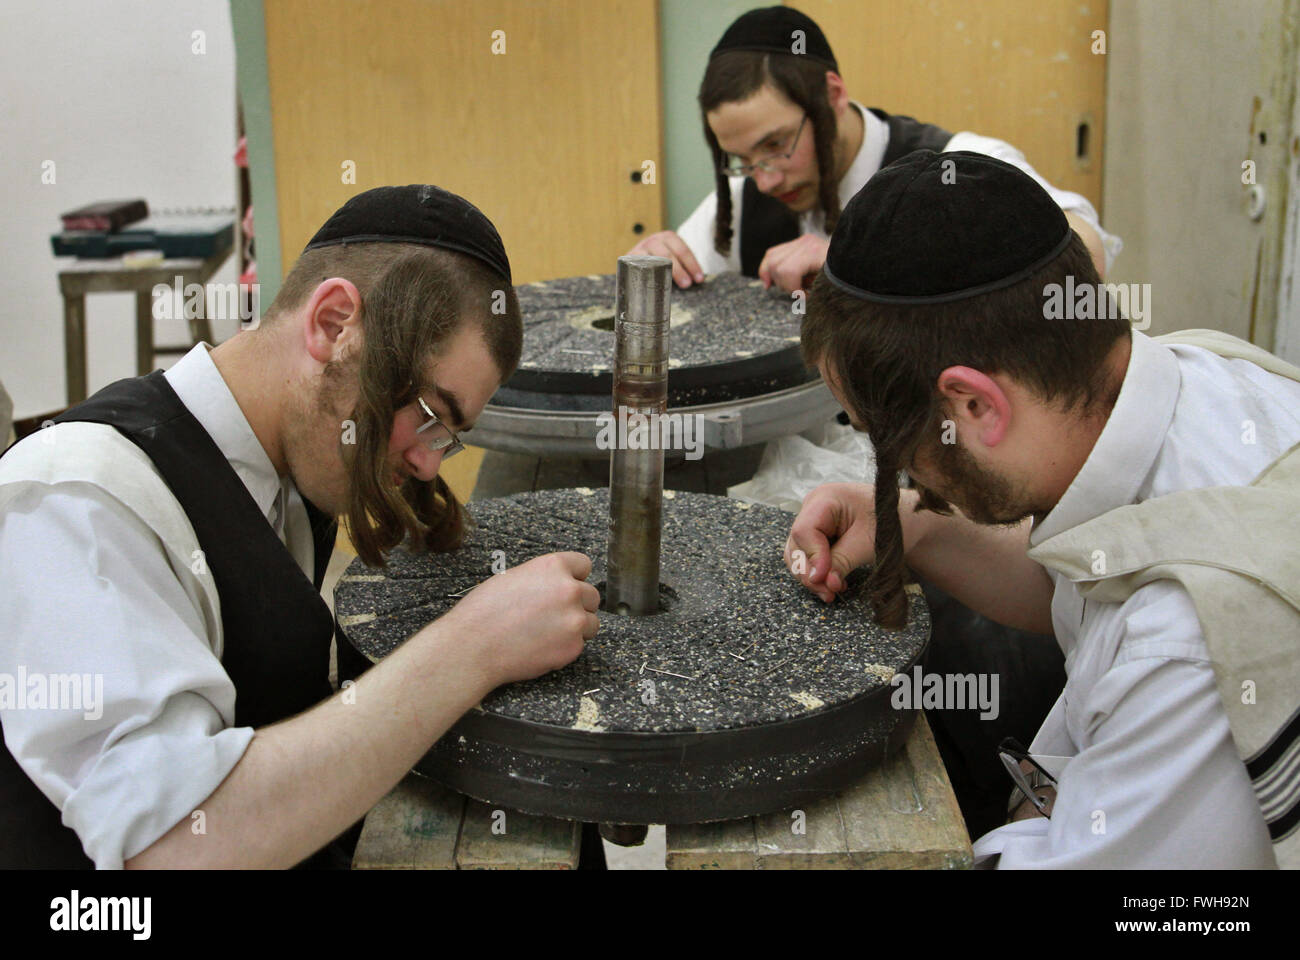 Jerusalem, Jewish holiday of Passover in Jerusalem. 5th Apr, 2016. Ultra-Orthodox Jews collect leftovers of flour for making matzoth (unleavened bread), traditionally eaten for the Jewish holiday of Passover in Jerusalem, on April 5, 2016. Religious Jews throughout the world eat matzoth during the eight-day Pesach holiday (Passover), which begins on April 22, with the sunset to commemorate the Israelis' exodus from Egypt some 3,500 years ago and commemorate their ancestors' plight by refraining from eating leavened food products. © Gil Cohen Magen/Xinhua/Alamy Live News Stock Photo